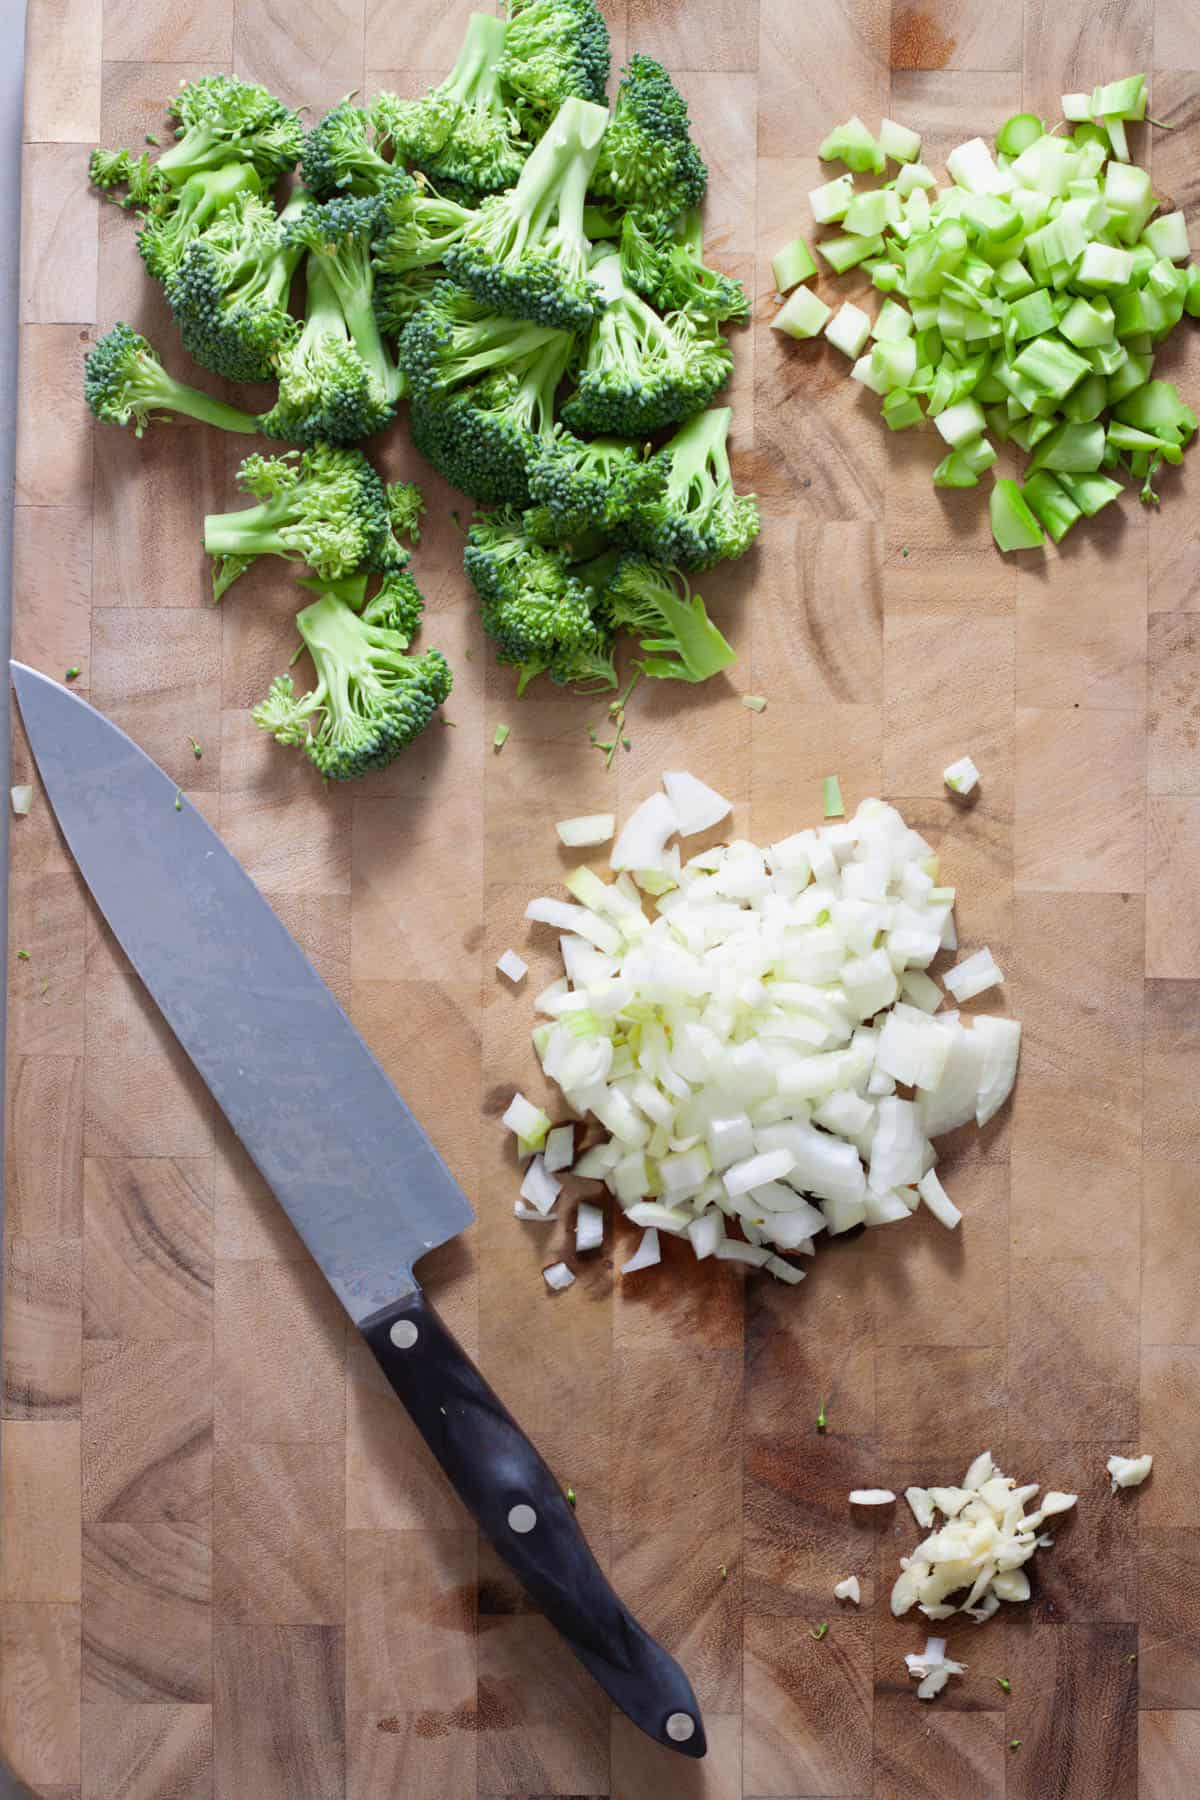 A diced onion and minced garlic on a cutting board with a head of broccoli diced and the florets chopped.